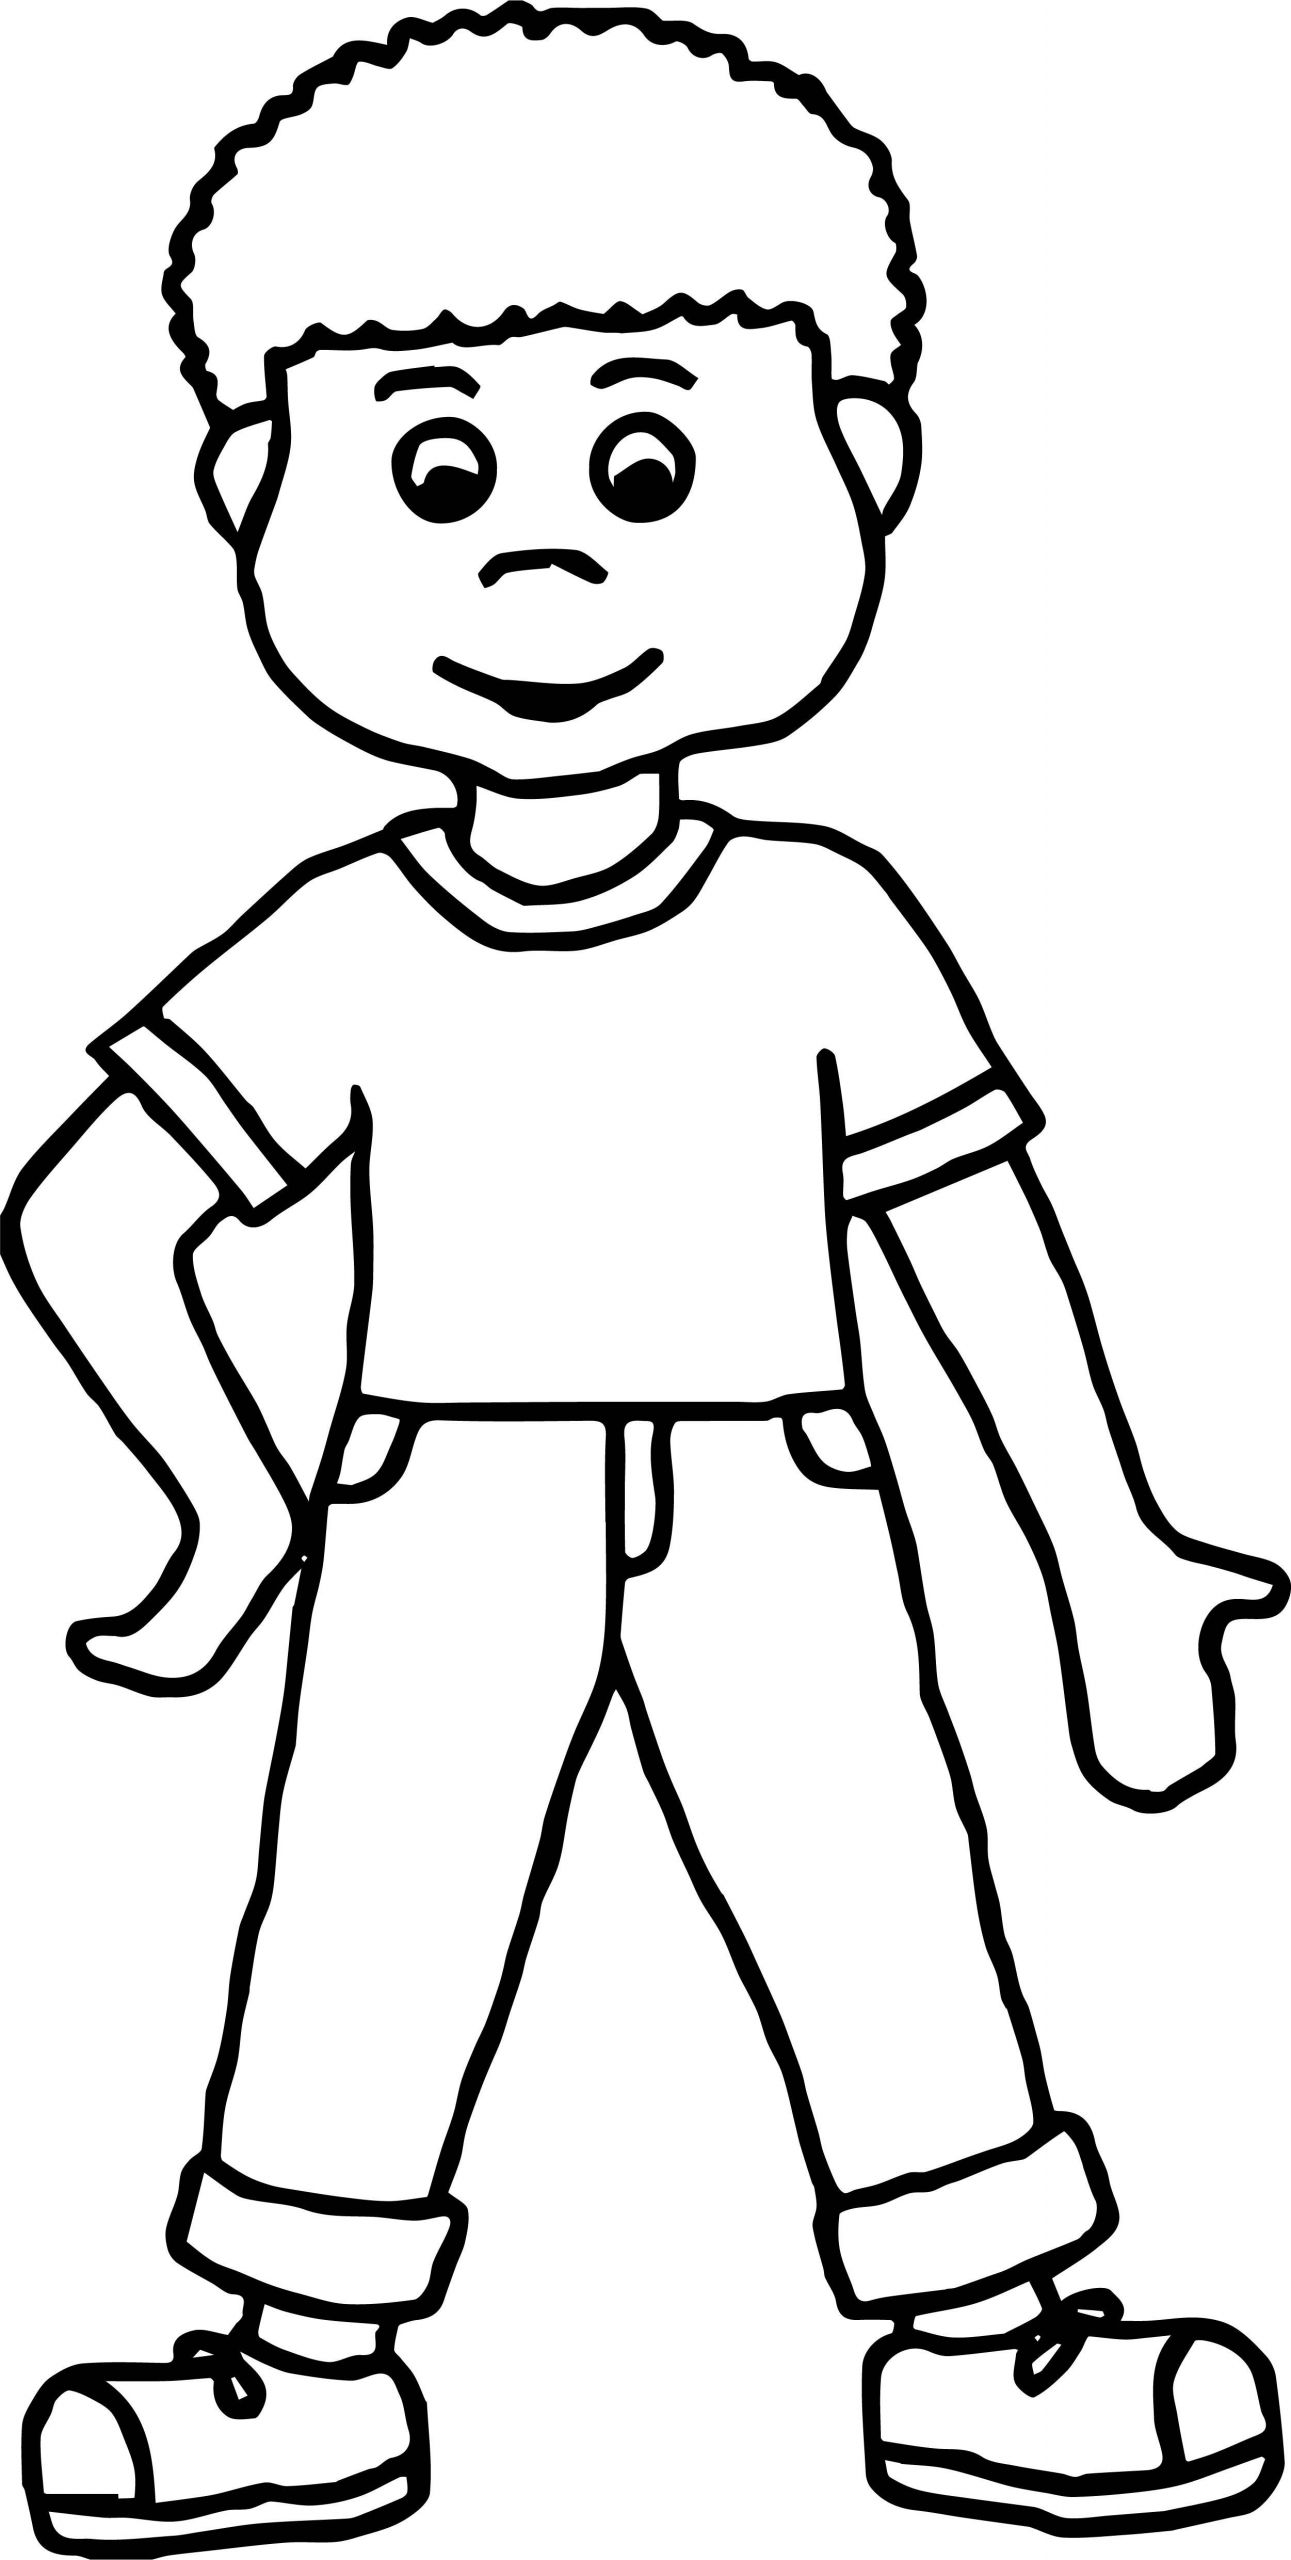 Cool Boys Coloring Pages
 Boy Front View Coloring Page